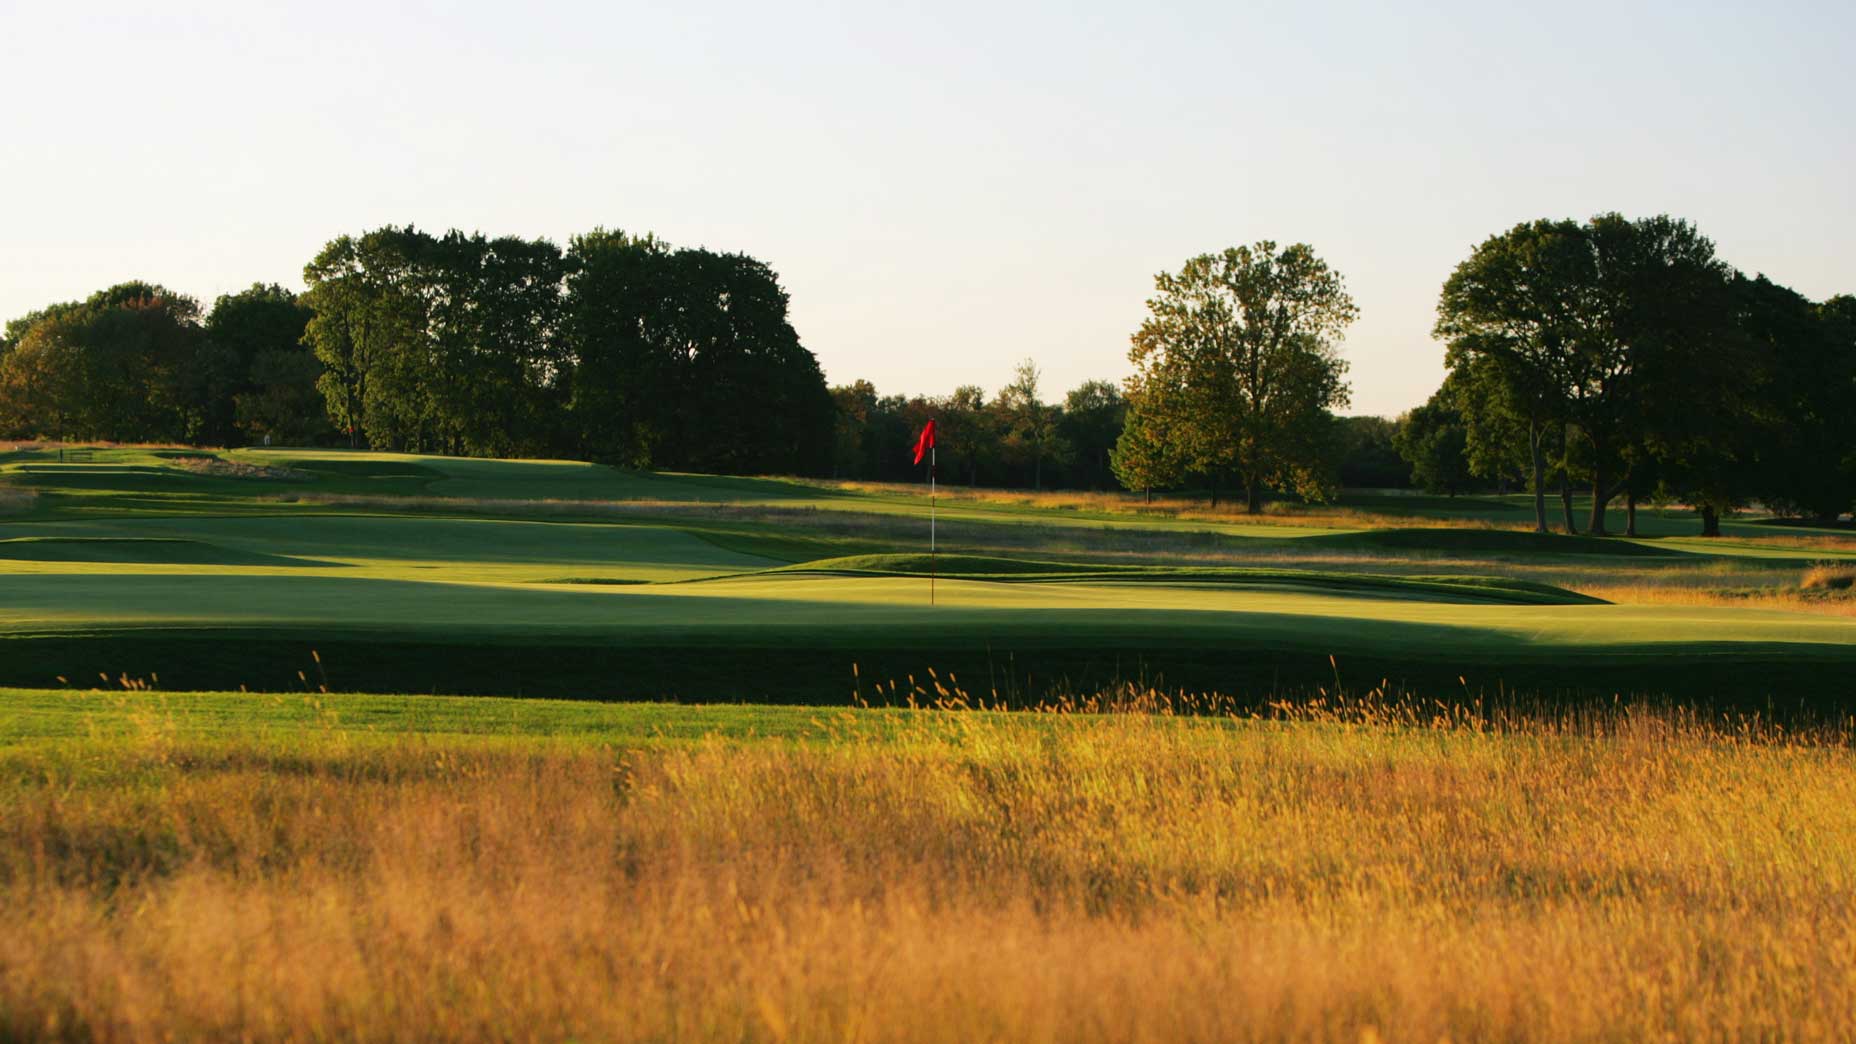 Best golf courses in Illinois, according to GOLF Magazine’s expert course raters